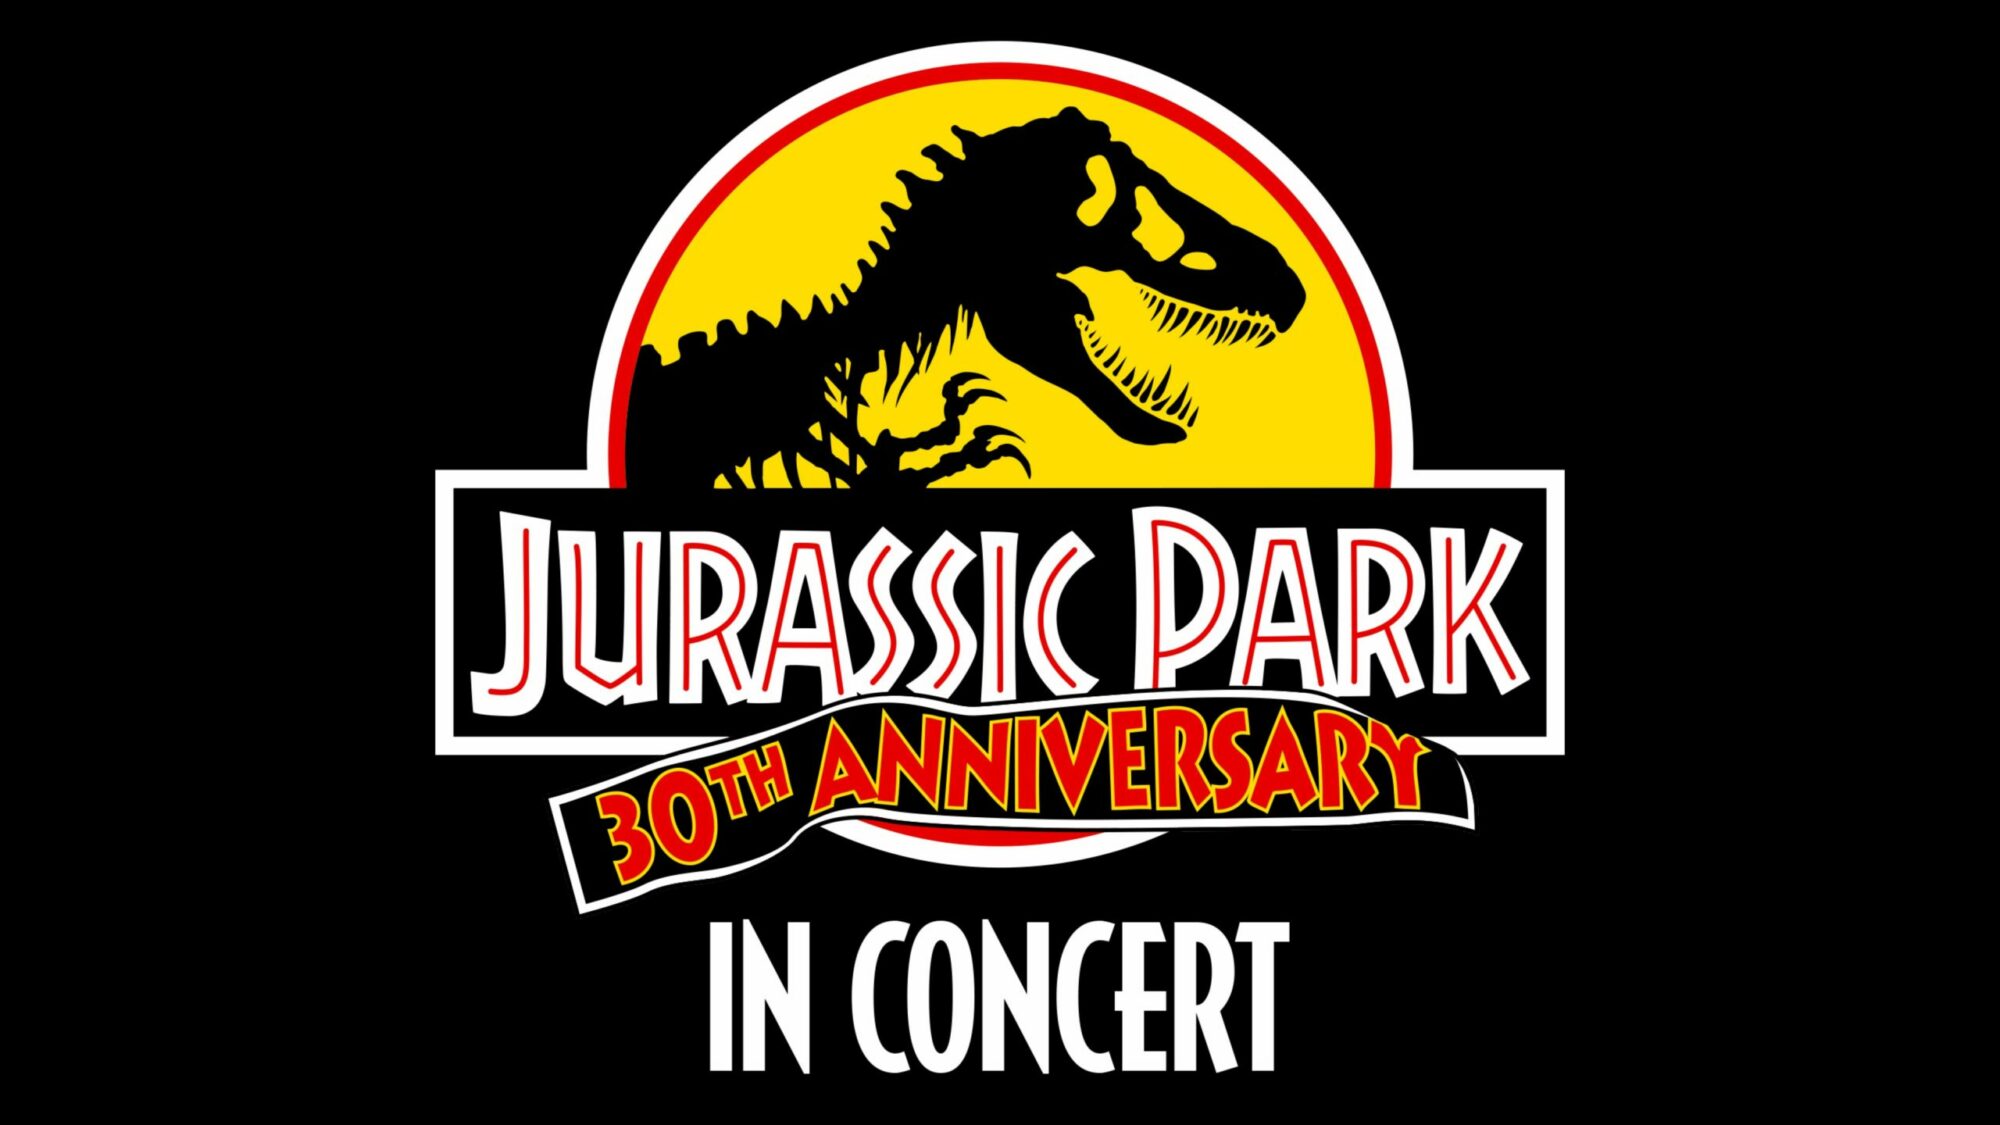 Image name Jurassic Park in Concert Premium Package The Luxury Experience at First Direct Arena Leeds scaled the 2 image from the post Jurassic Park in Concert - Premium Package - The Luxury Experience at First Direct Arena, Leeds in Yorkshire.com.